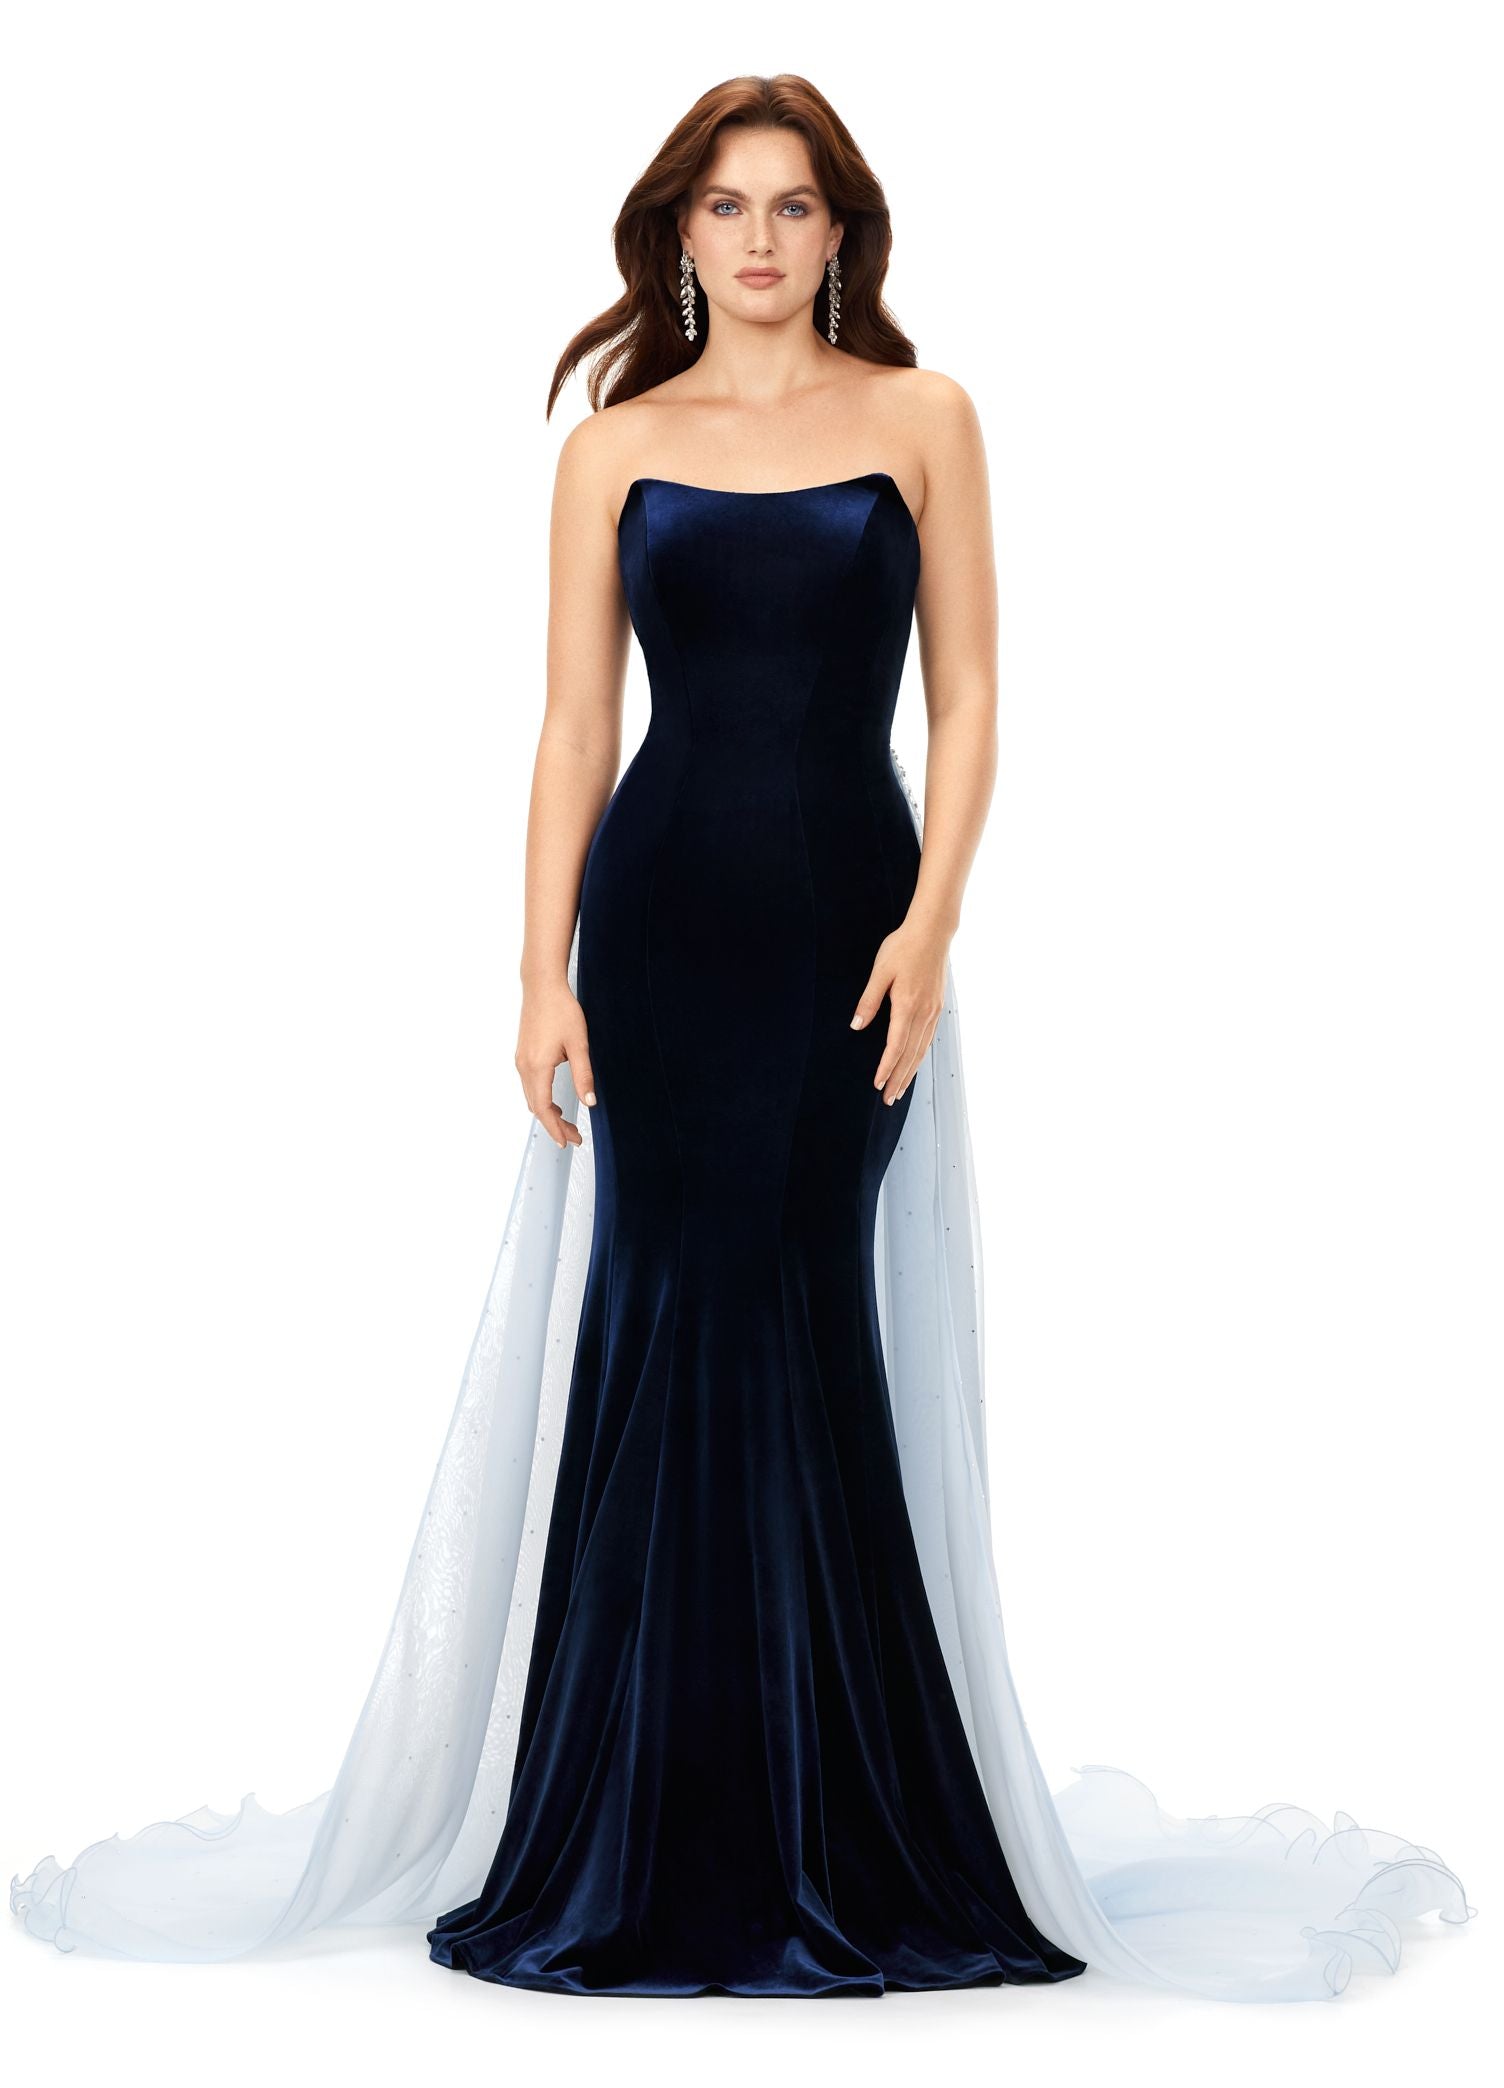 Ashley Lauren 11311 This stunning velvet gown features a sweetheart neckline with an organza overskirt. The overskirt is embellished with scattered crystals that cascade down the skirt. Strapless Bustier Crystal Details Stretch Velvet Organza Overskirt COLORS: Navy/Sky, Black/Ivory